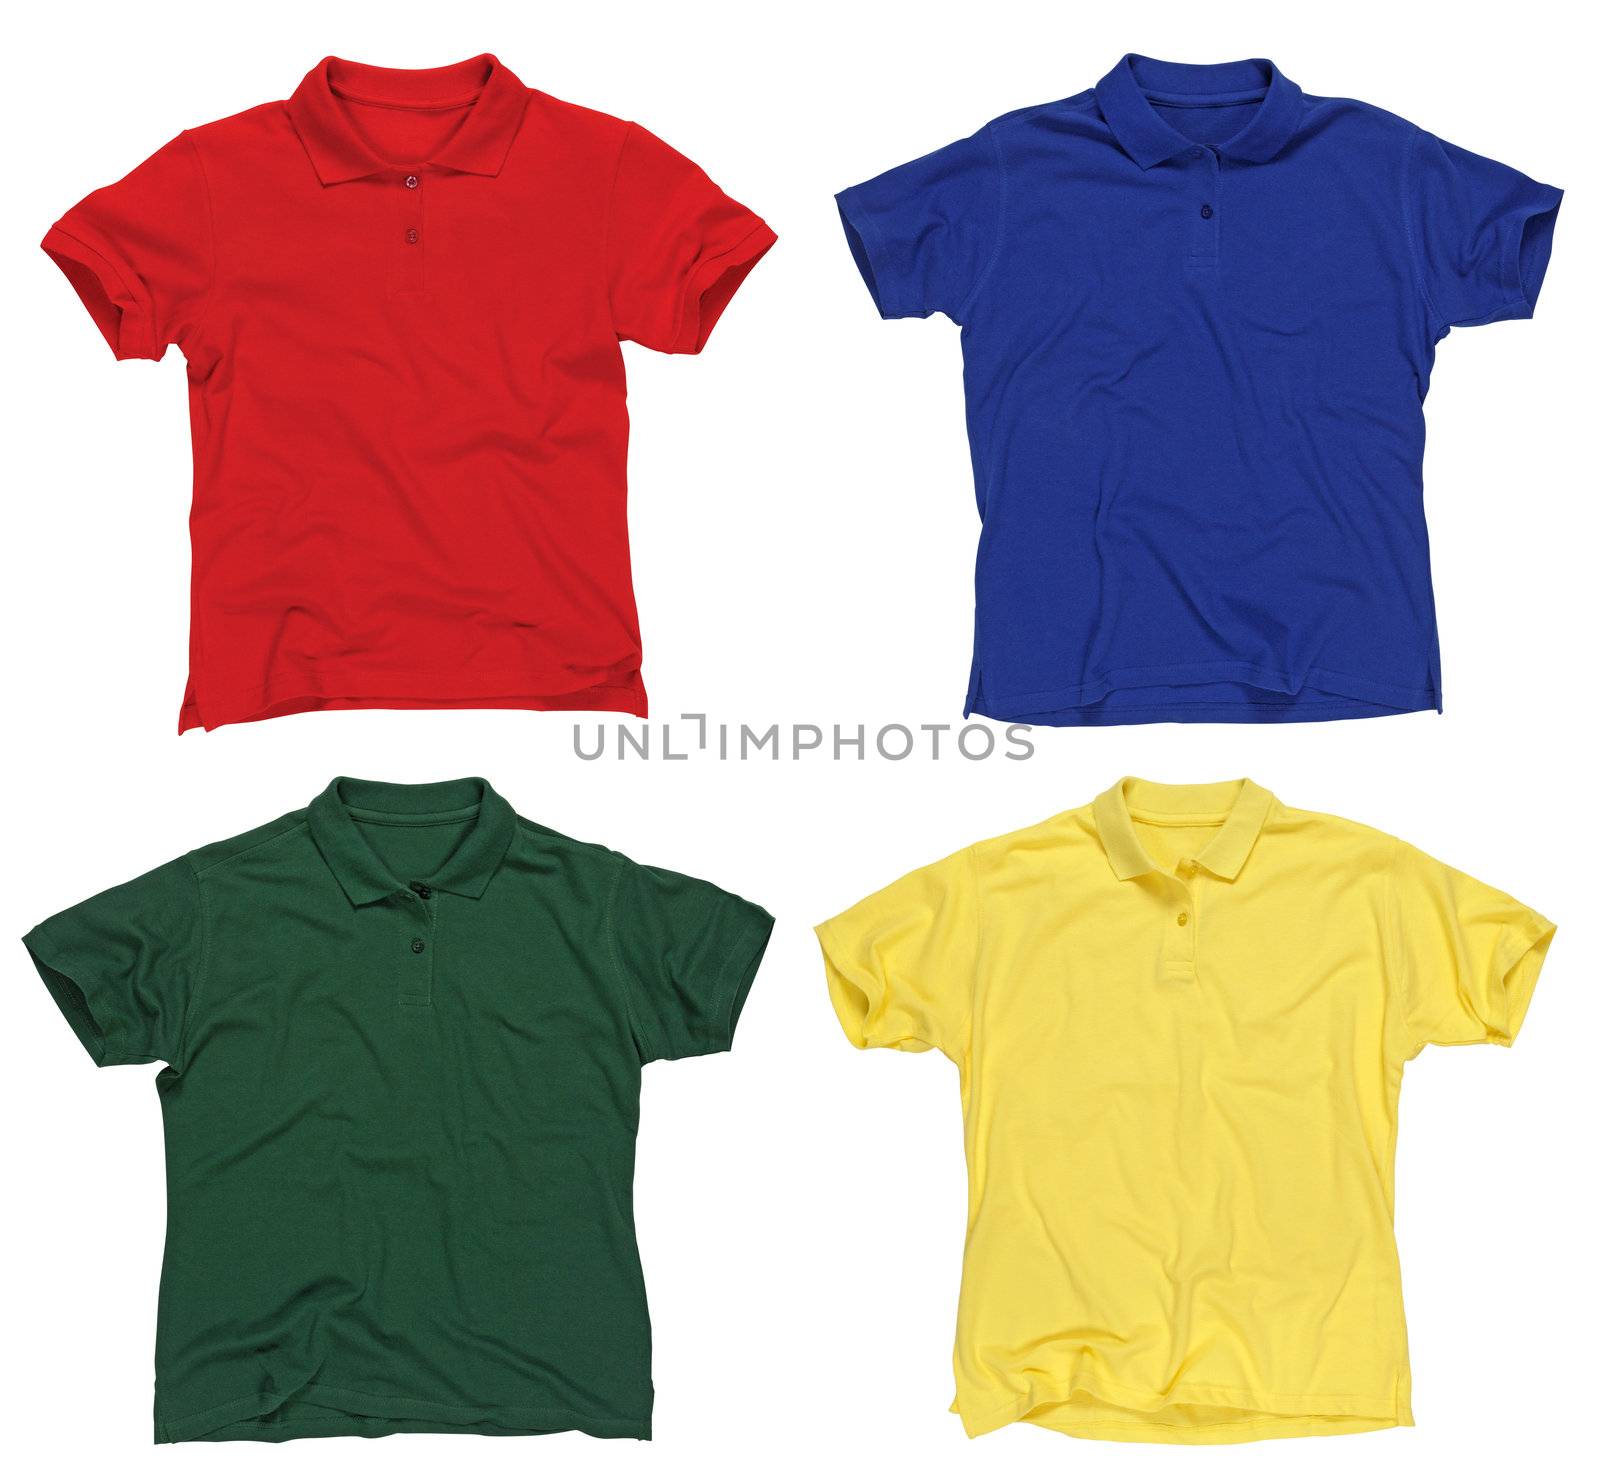 Photograph of four blank polo shirts, red, blue, green and yellow.  Clipping paths included.  Ready for your design or logo.